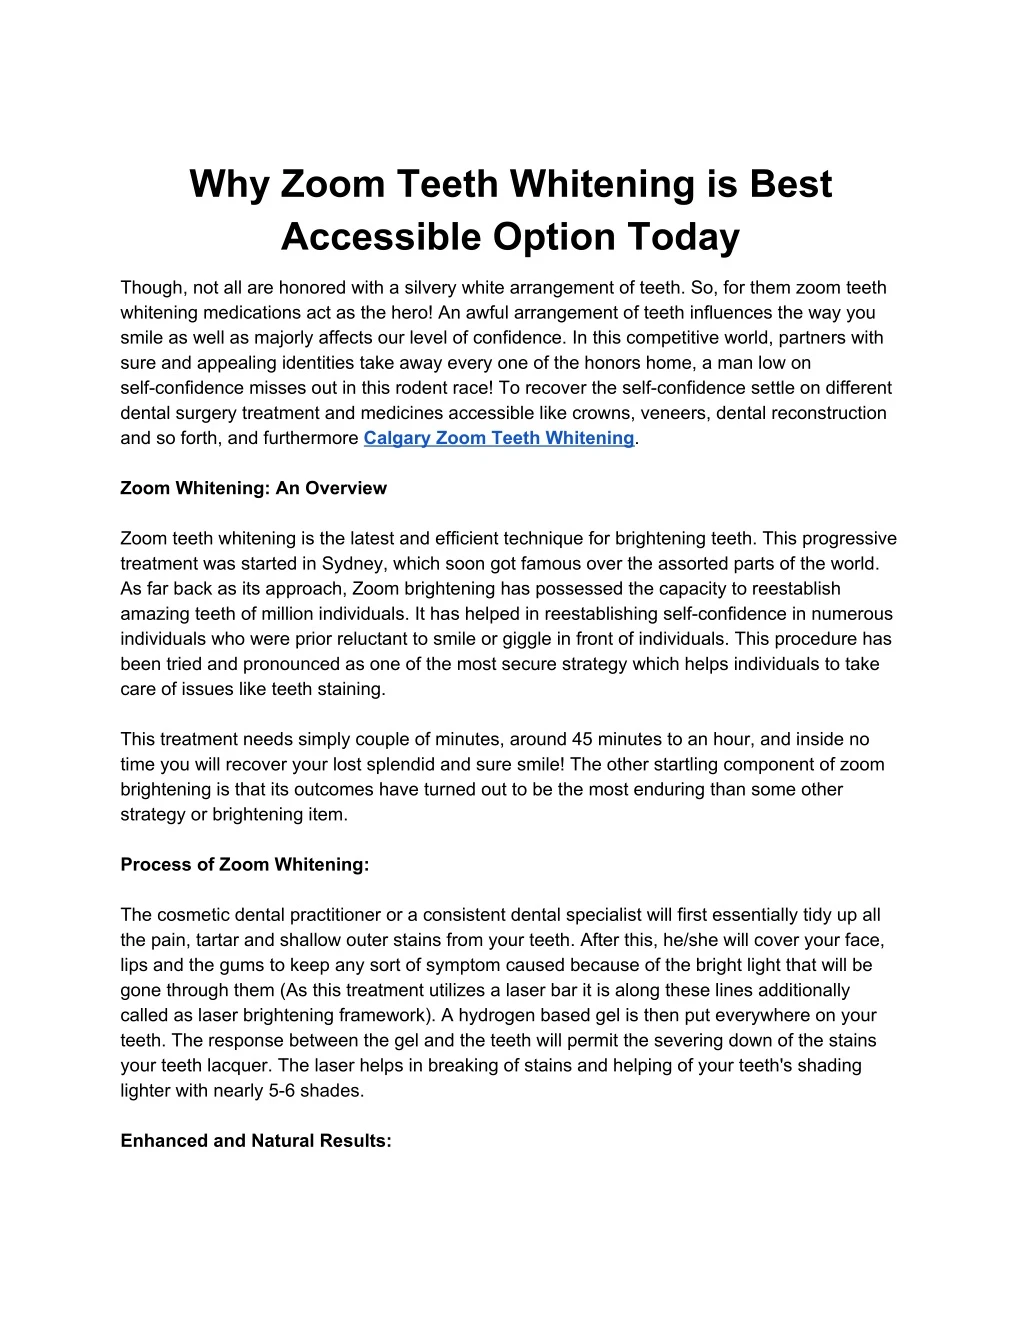 why zoom teeth whitening is best accessible